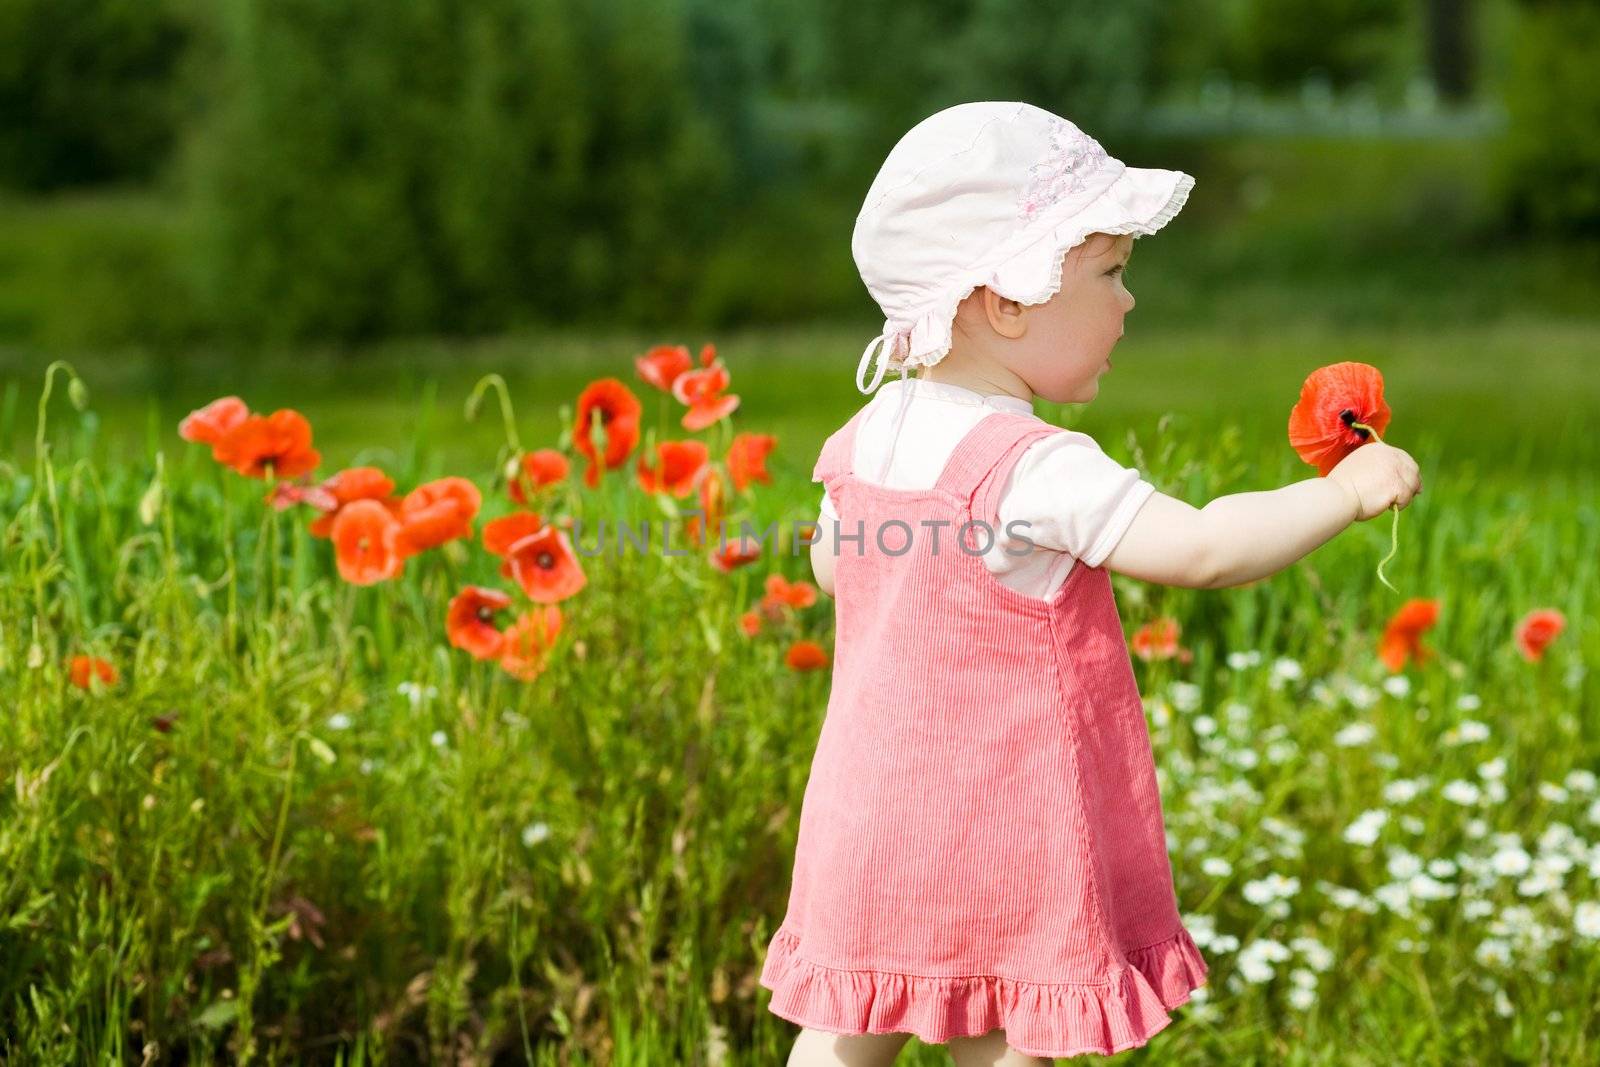 An image of baby-girl amongst field with poppies